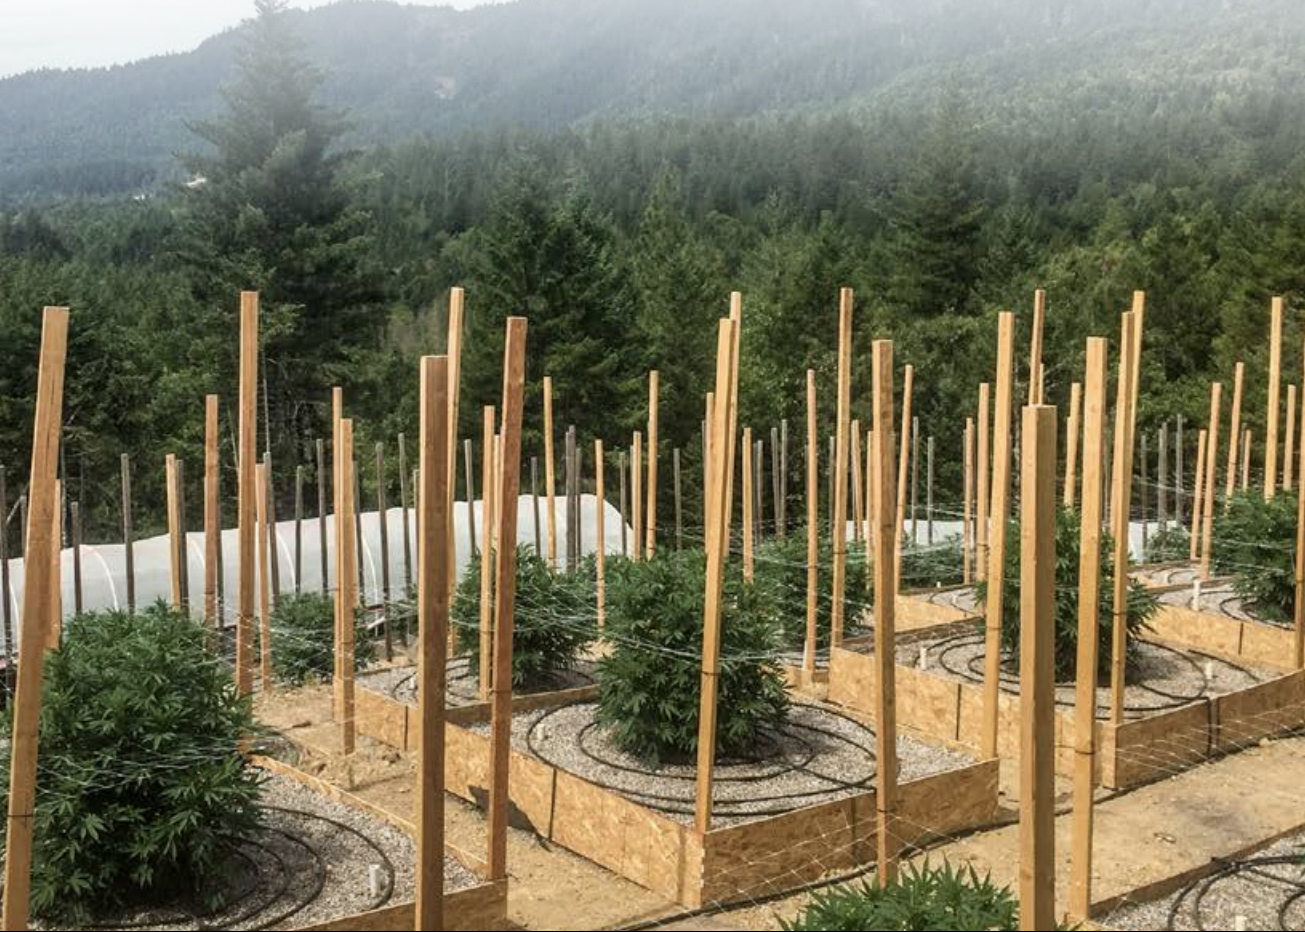 Photo of cannabis plants growing outdoors in individual planters with irrigation and a forested background